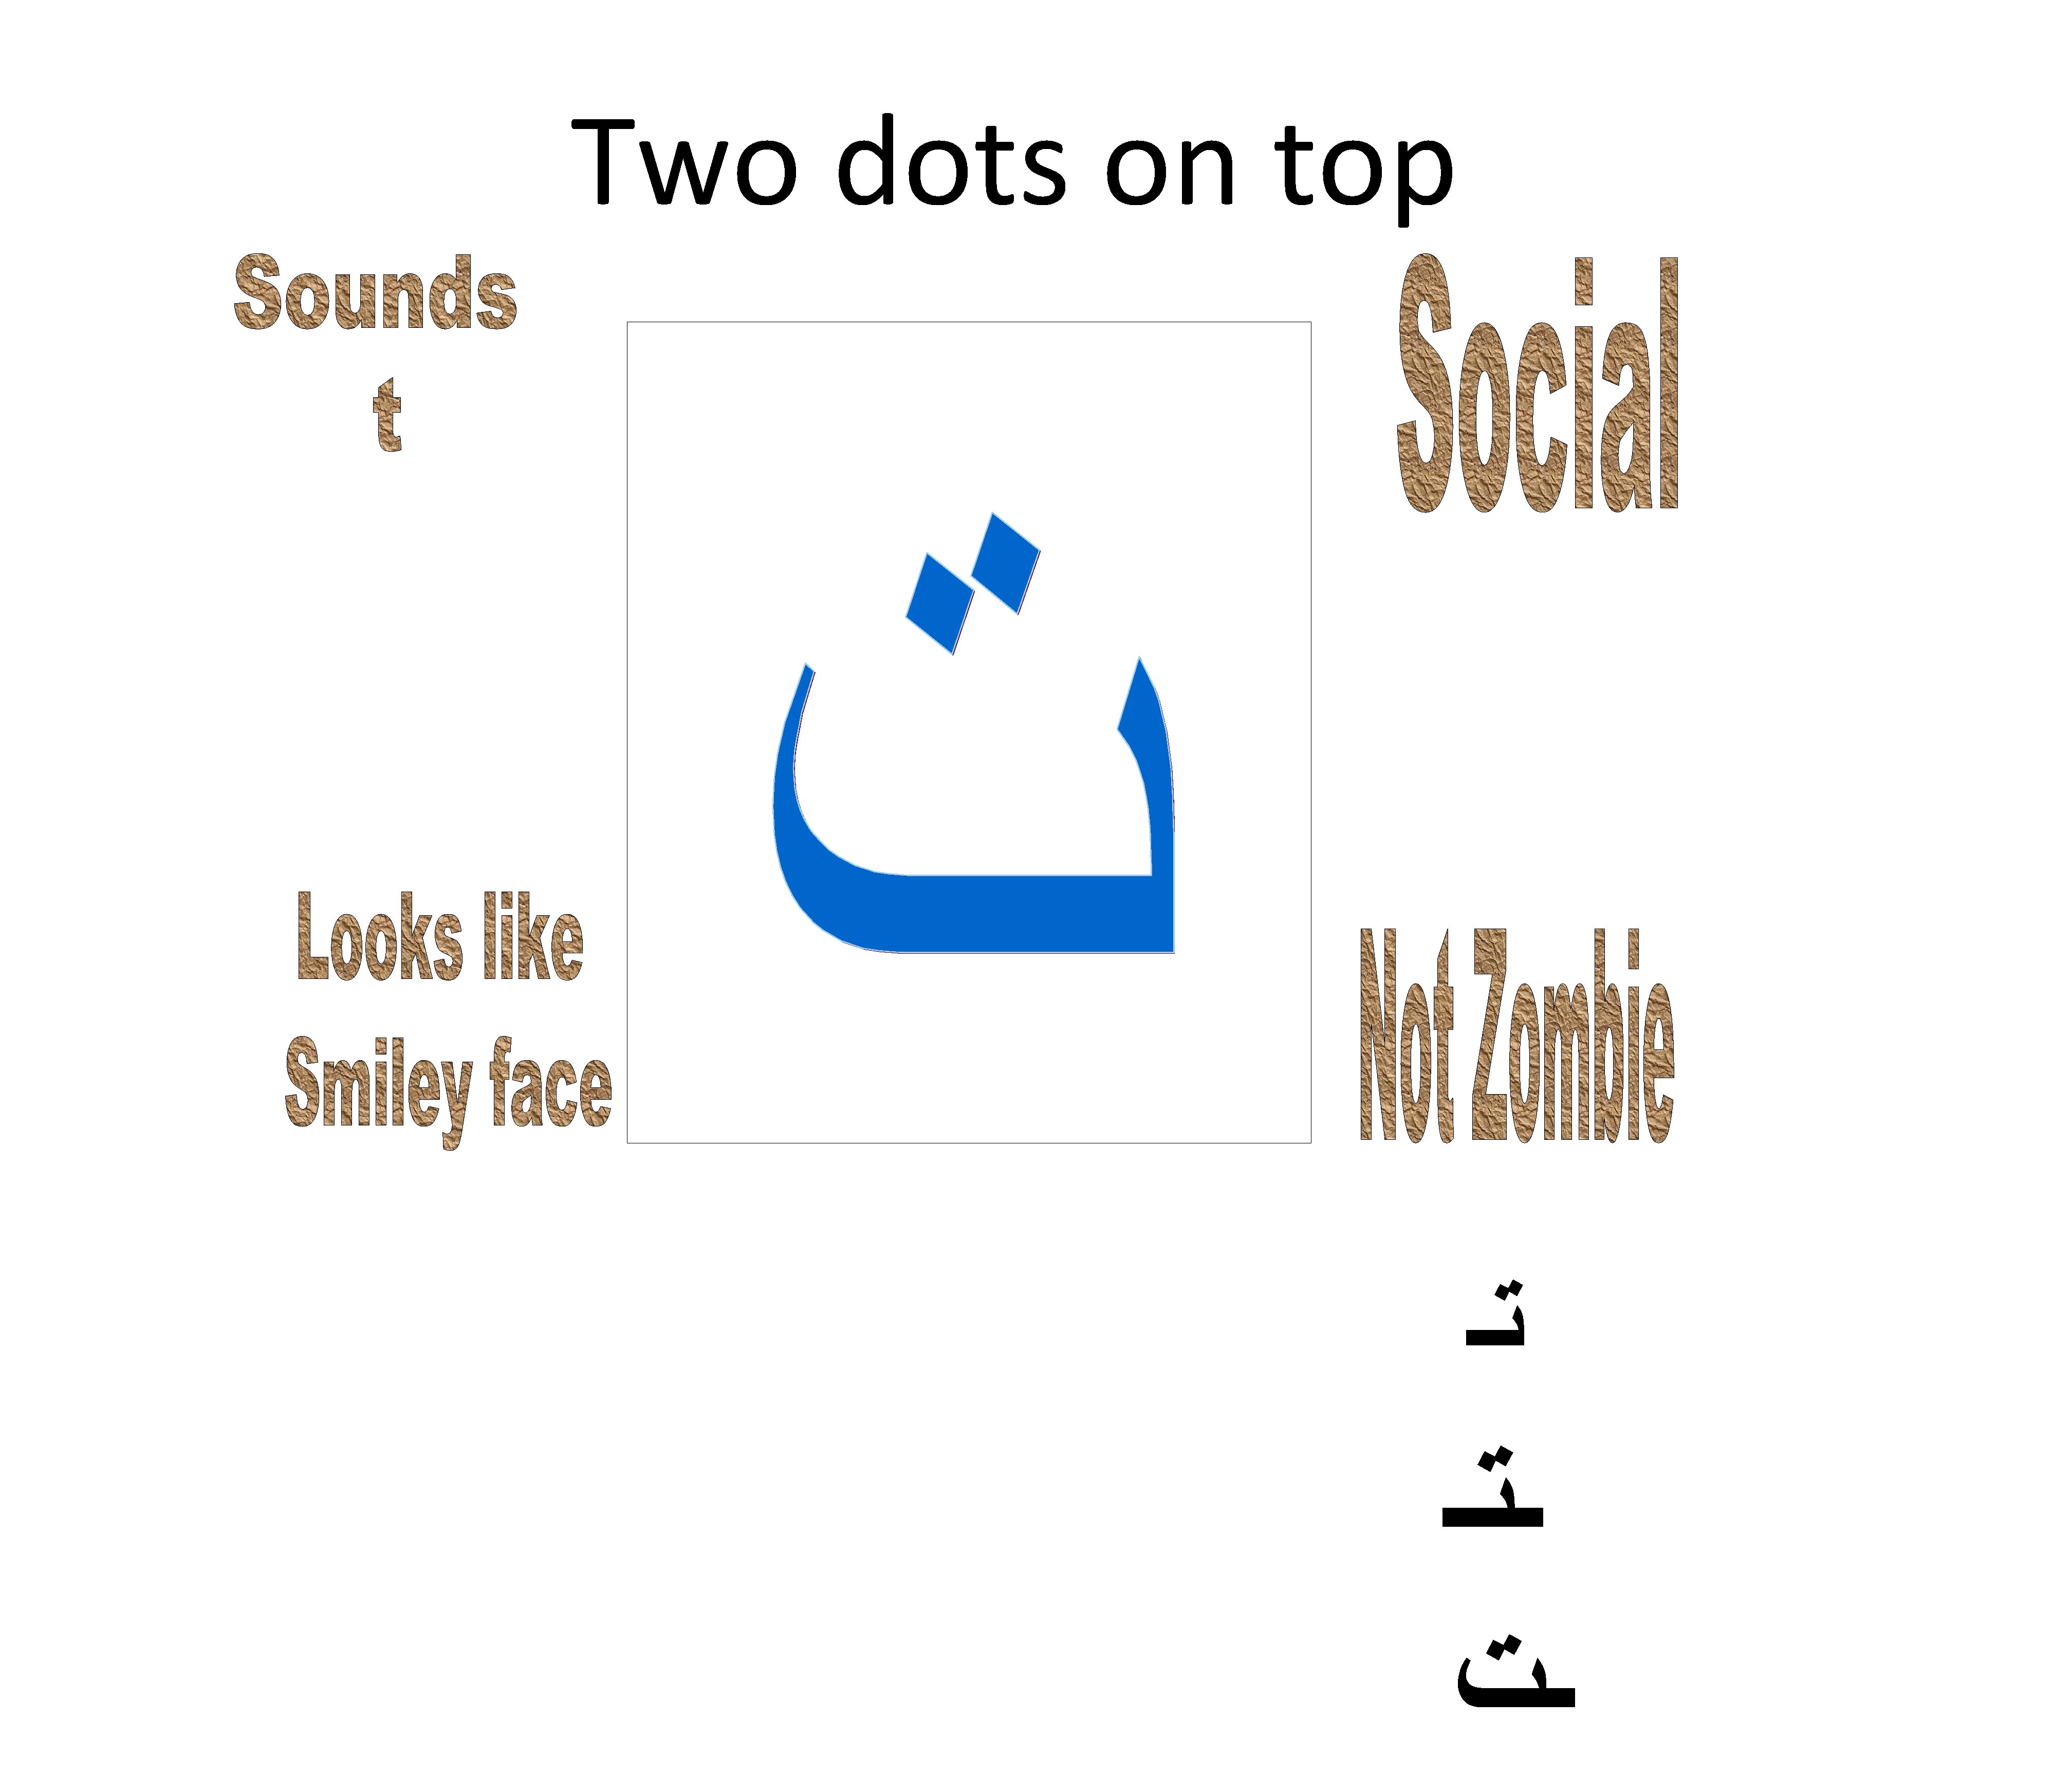 Two dots on top ﺗـ ـﺘـ ـﺖ 